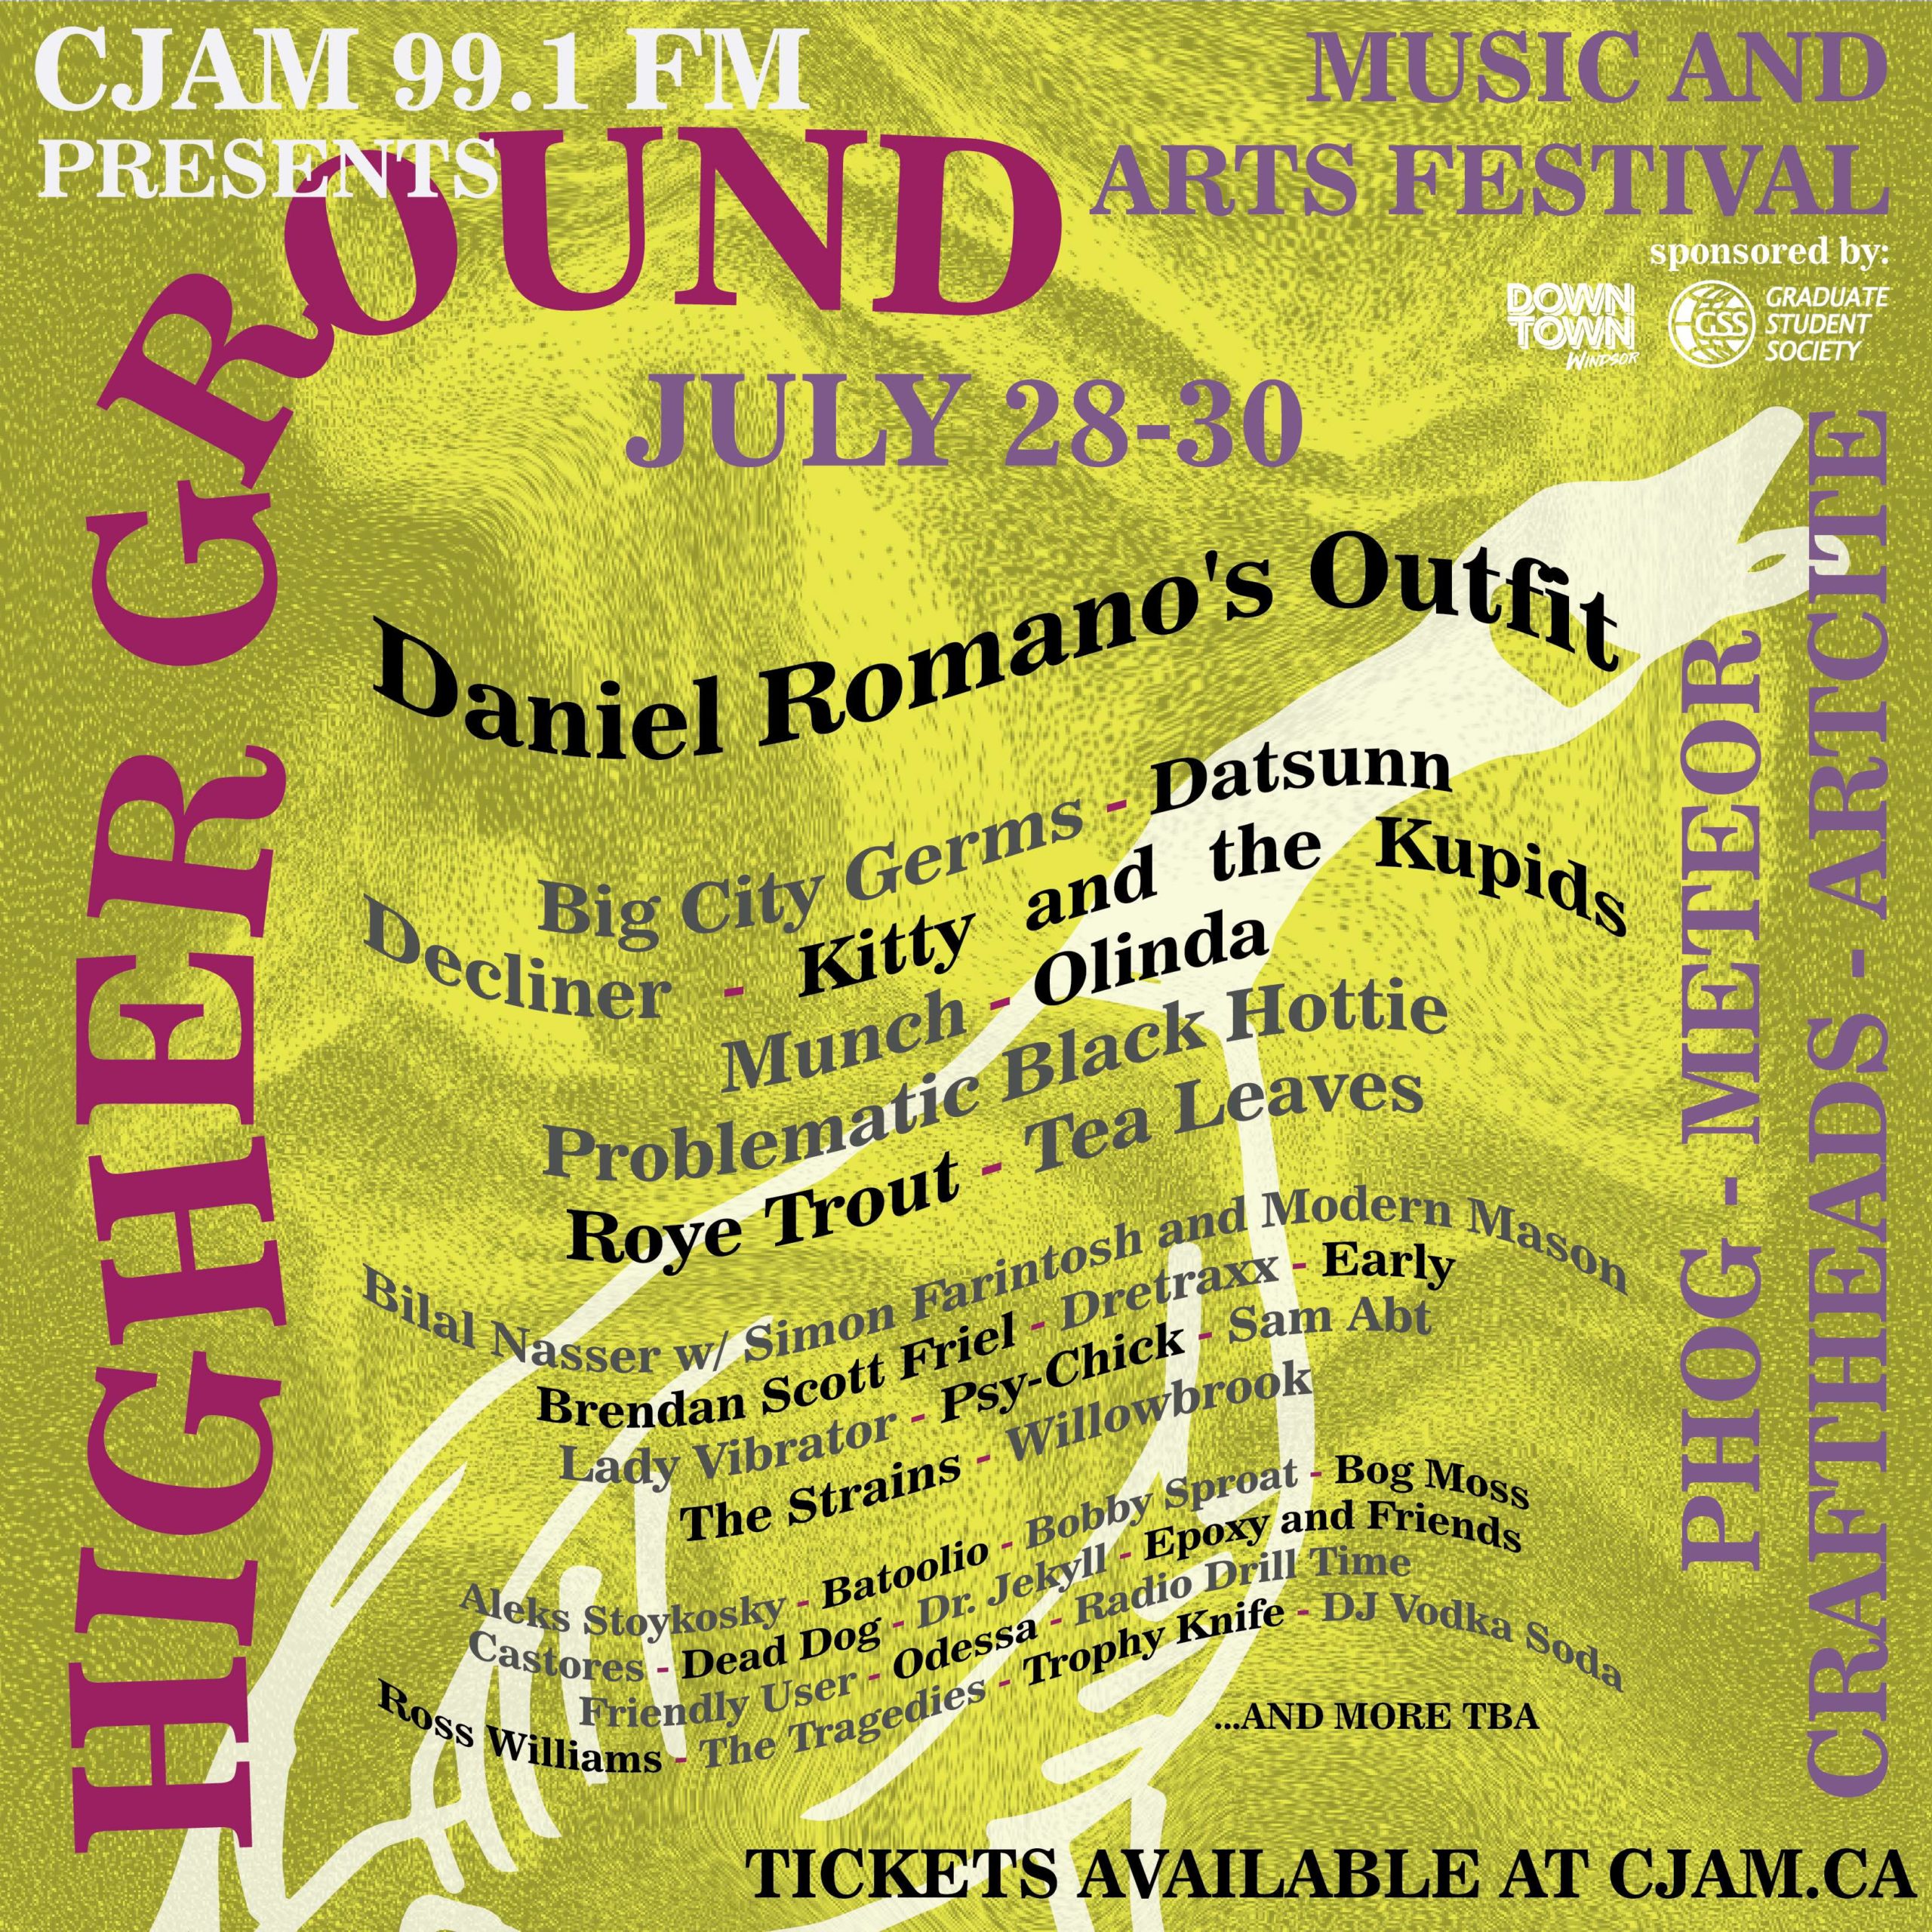 CITY BUILDING: Higher Ground Music and Arts Festival